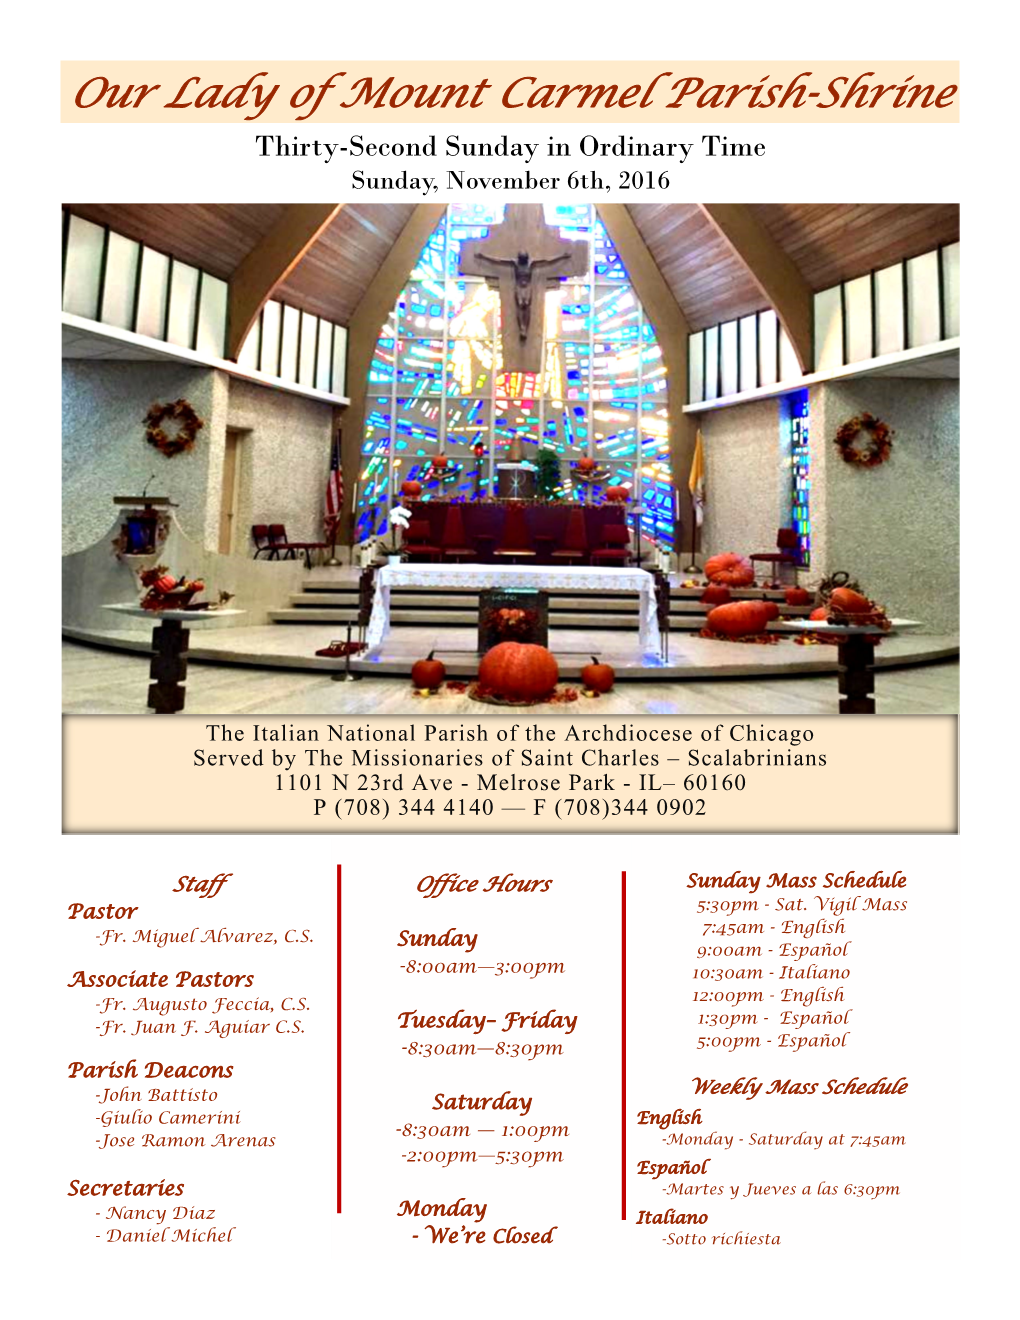 Our Lady of Mount Carmel Parish-Shrine Thirty-Second Sunday in Ordinary Time Sunday, November 6Th, 2016